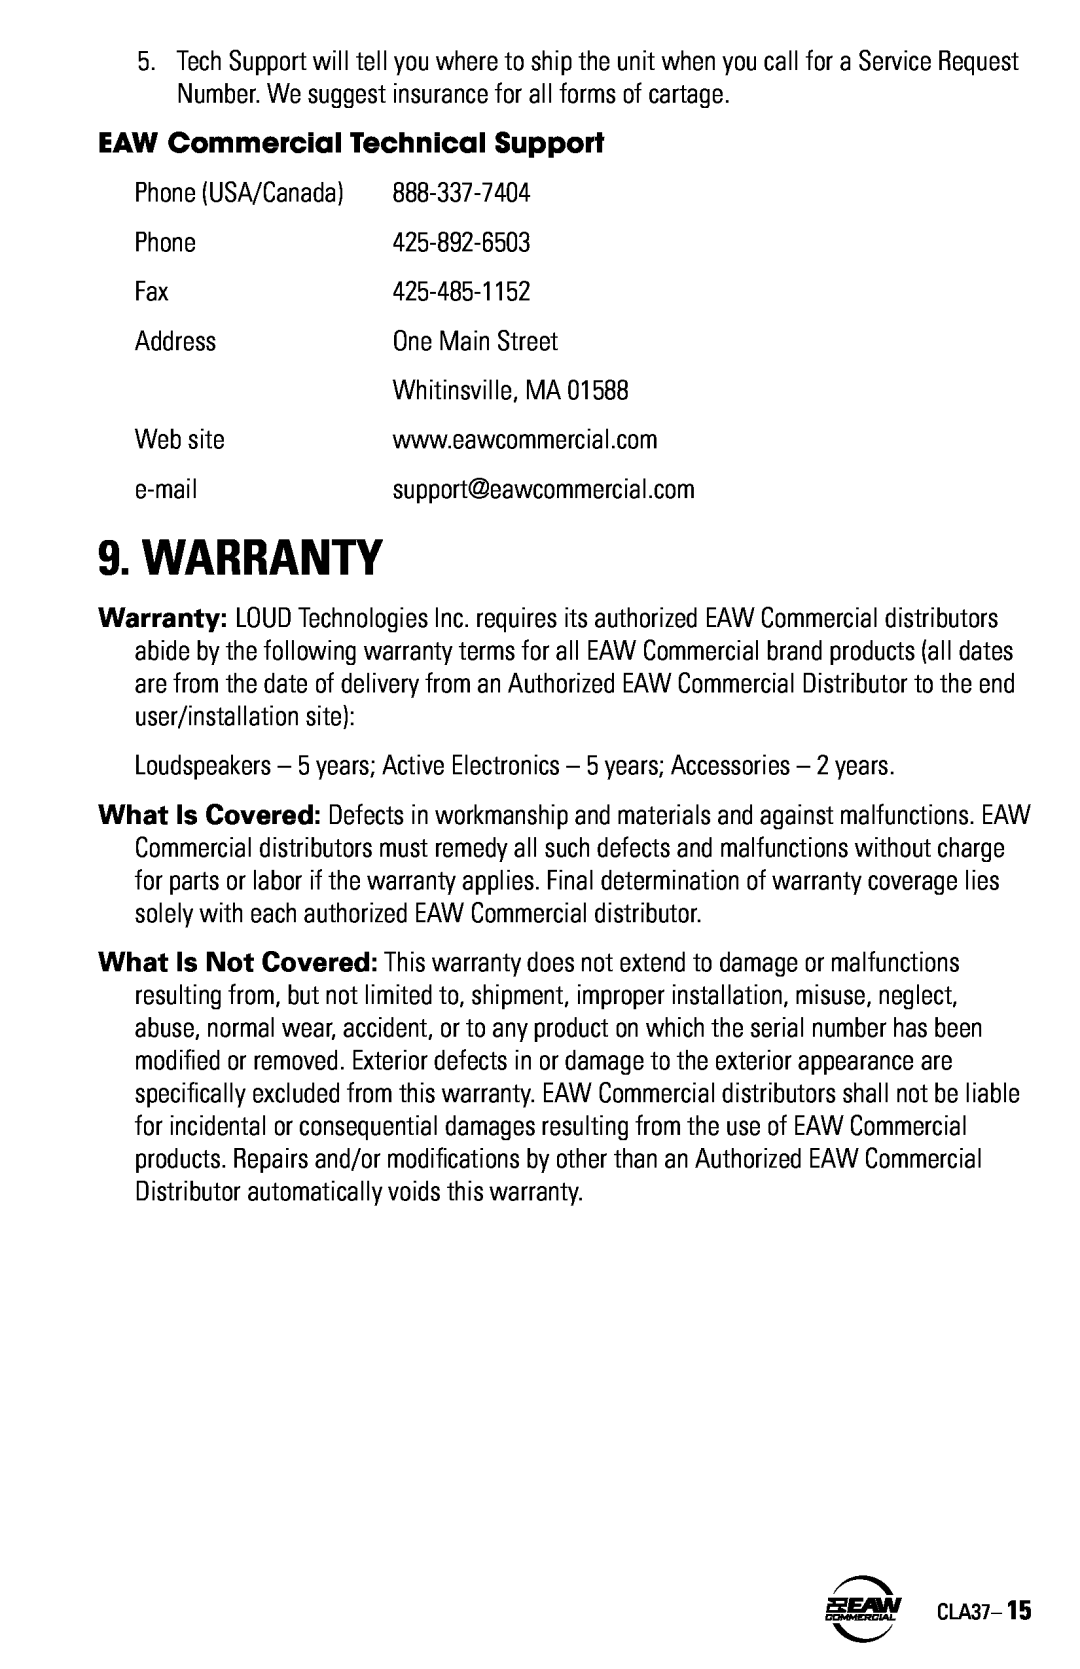 EAW CLA37 instruction manual Warranty, EAW Commercial Technical Support 